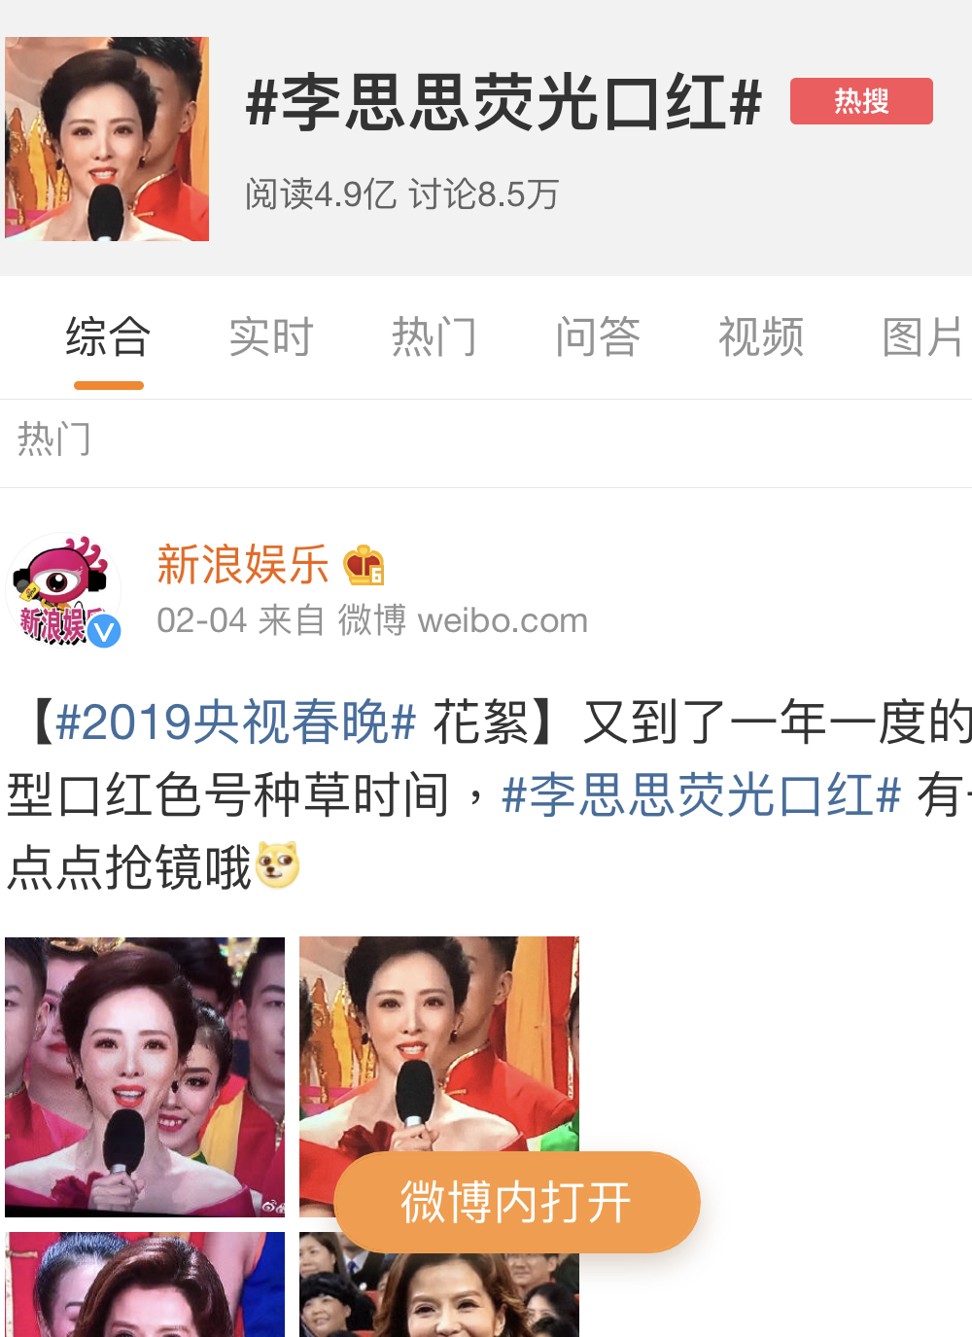 ‘Chunwan’ host Li Sisi, sparked an internet storm after posts about her bright lipstick went viral.